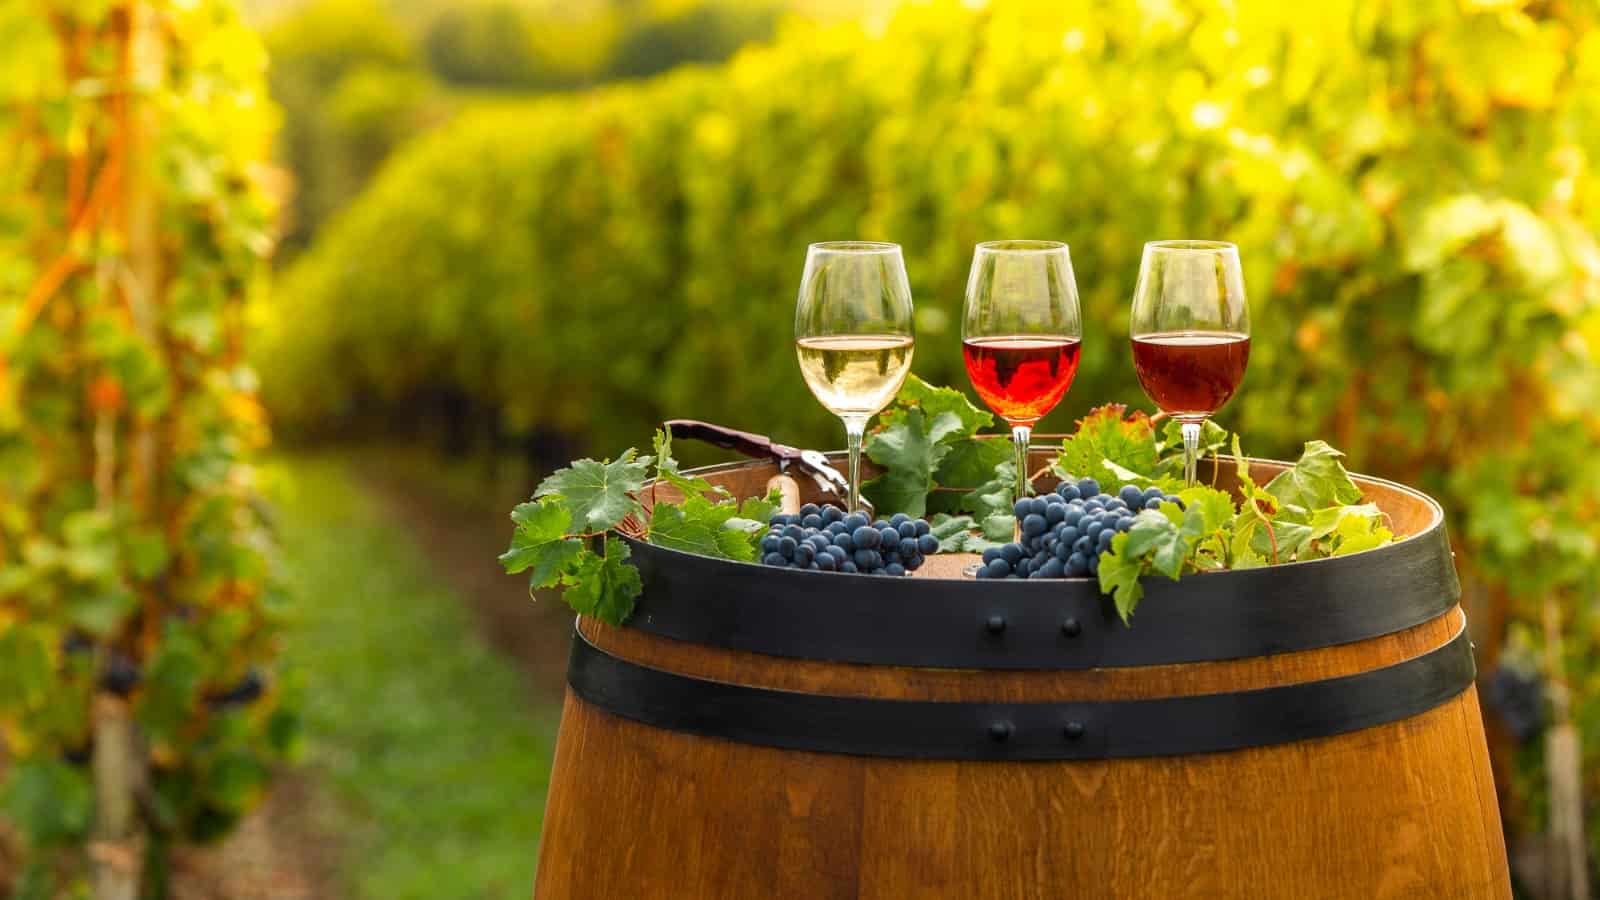 Three glasses with red, rose and white wine and ripe bunches of grapes are on a wine barrel against the backdrop of a vineyard